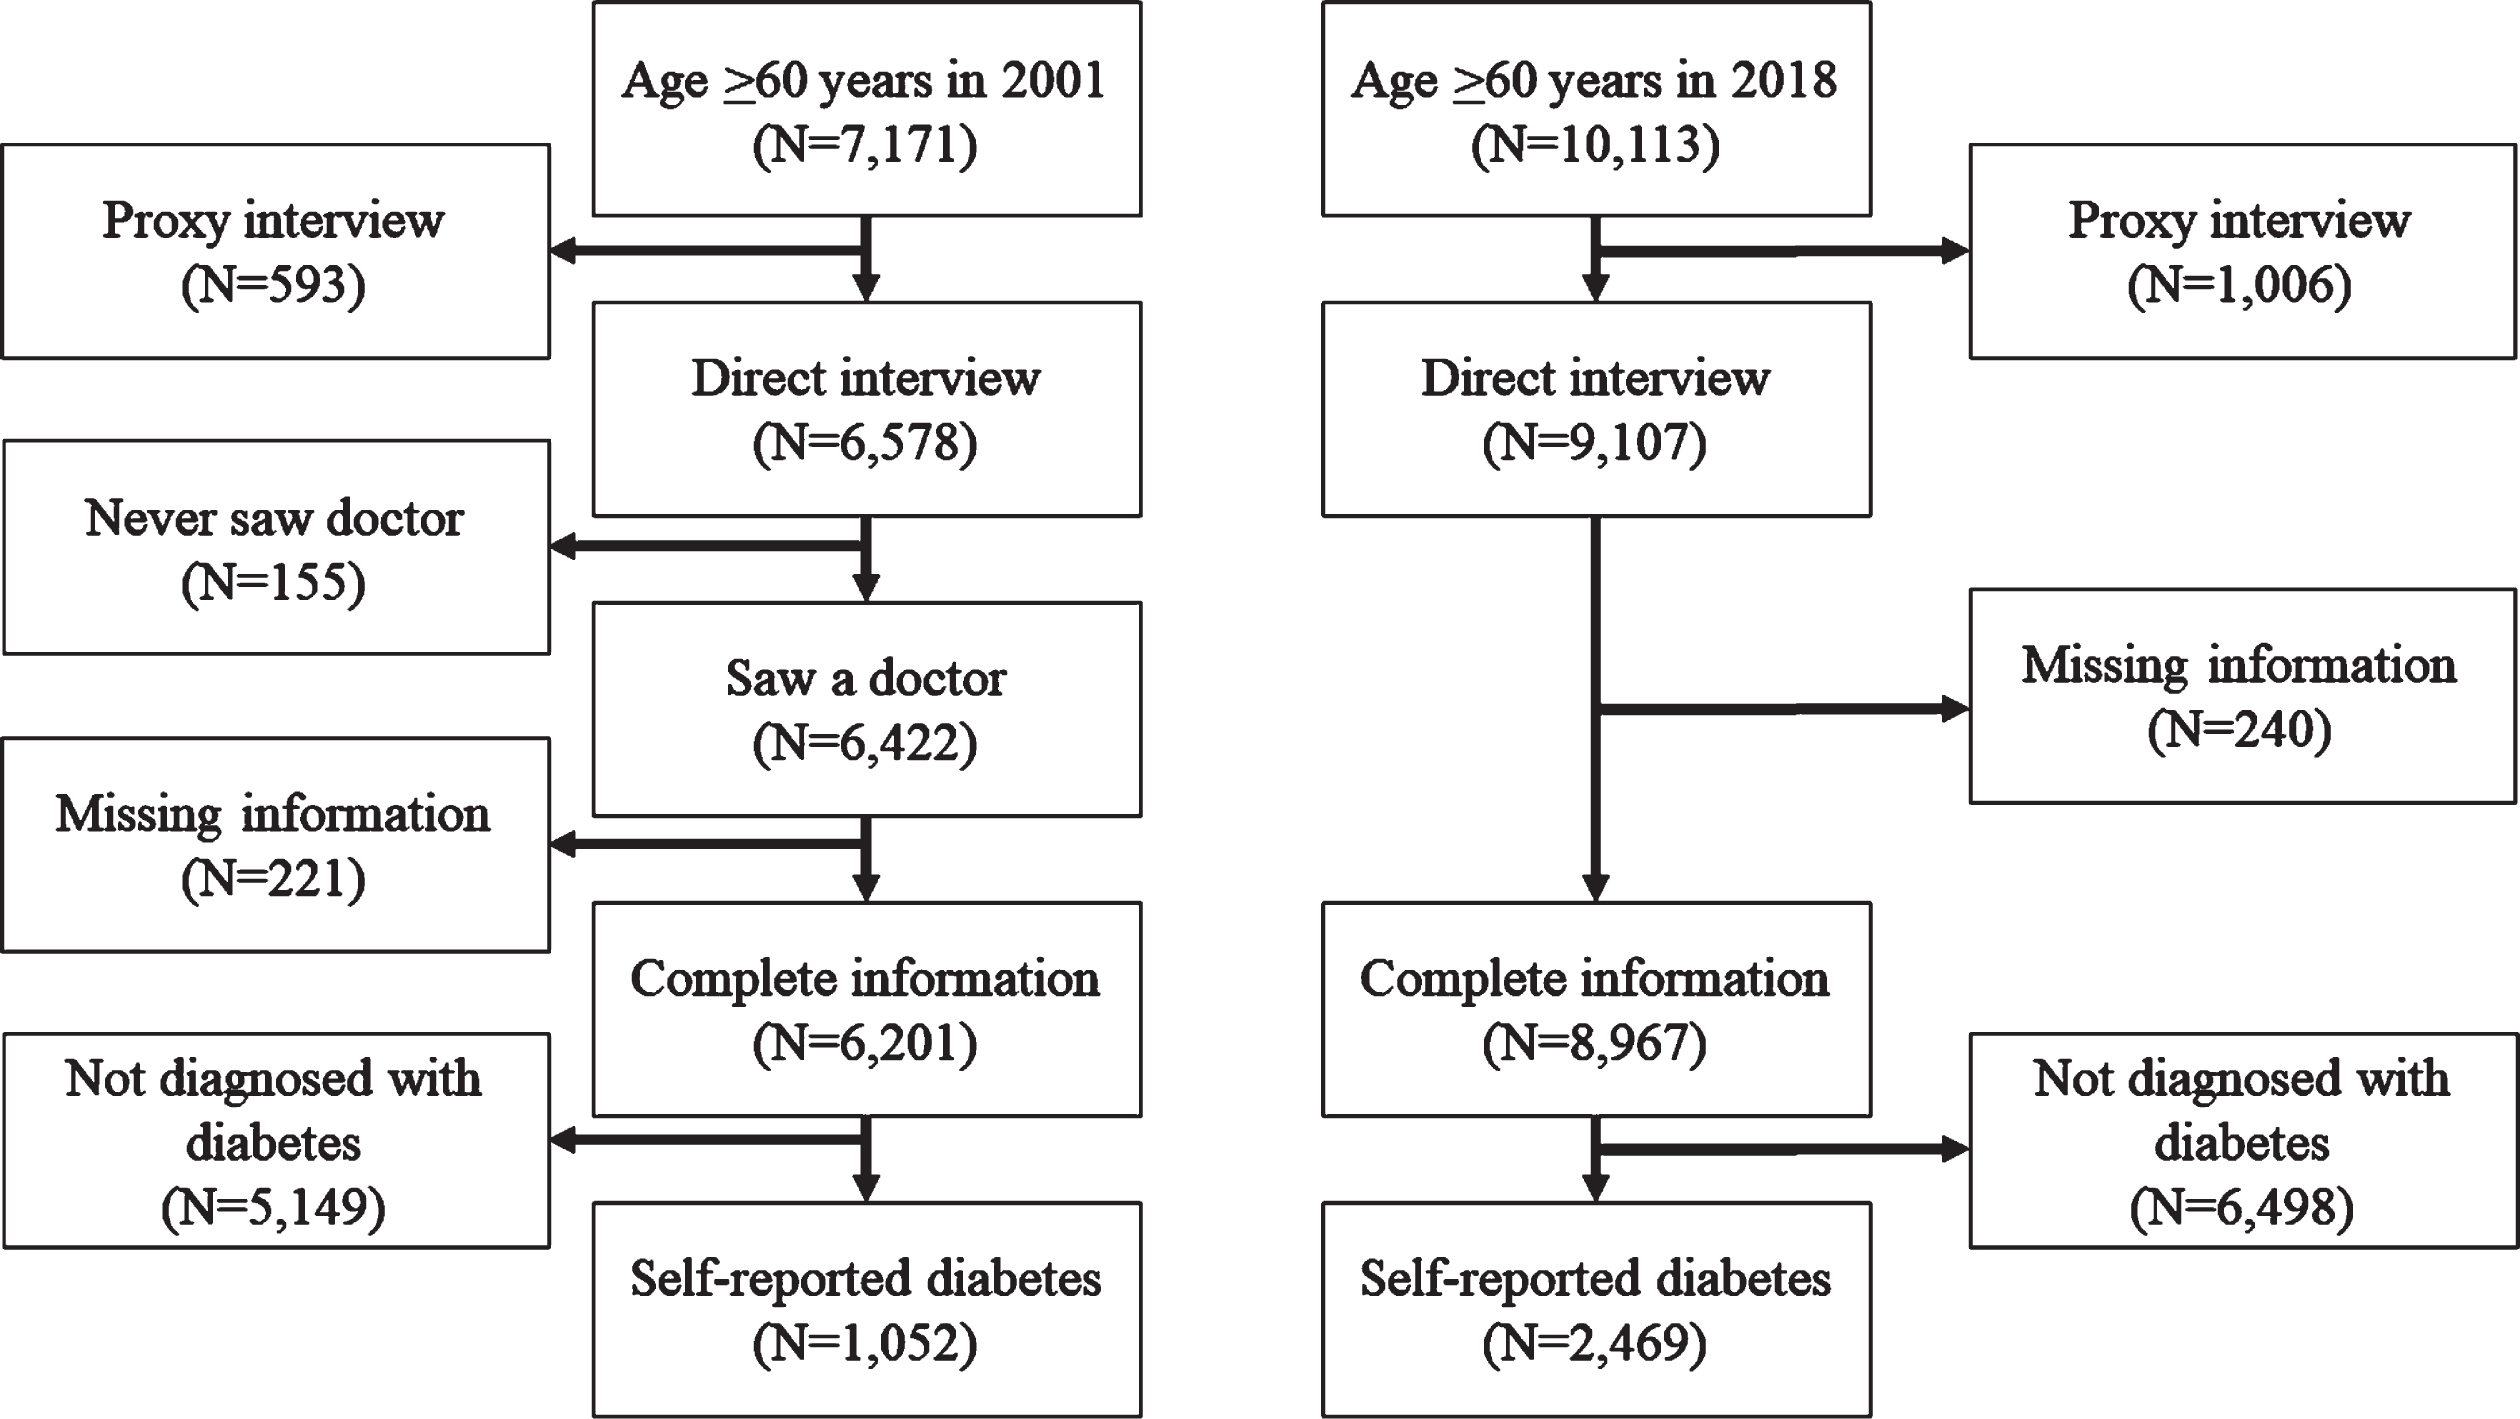 Sample selection criteria for Mexican Health and Aging participants aged 60 and older with self-reported diabetes during the 2001 and 2018 observation waves.